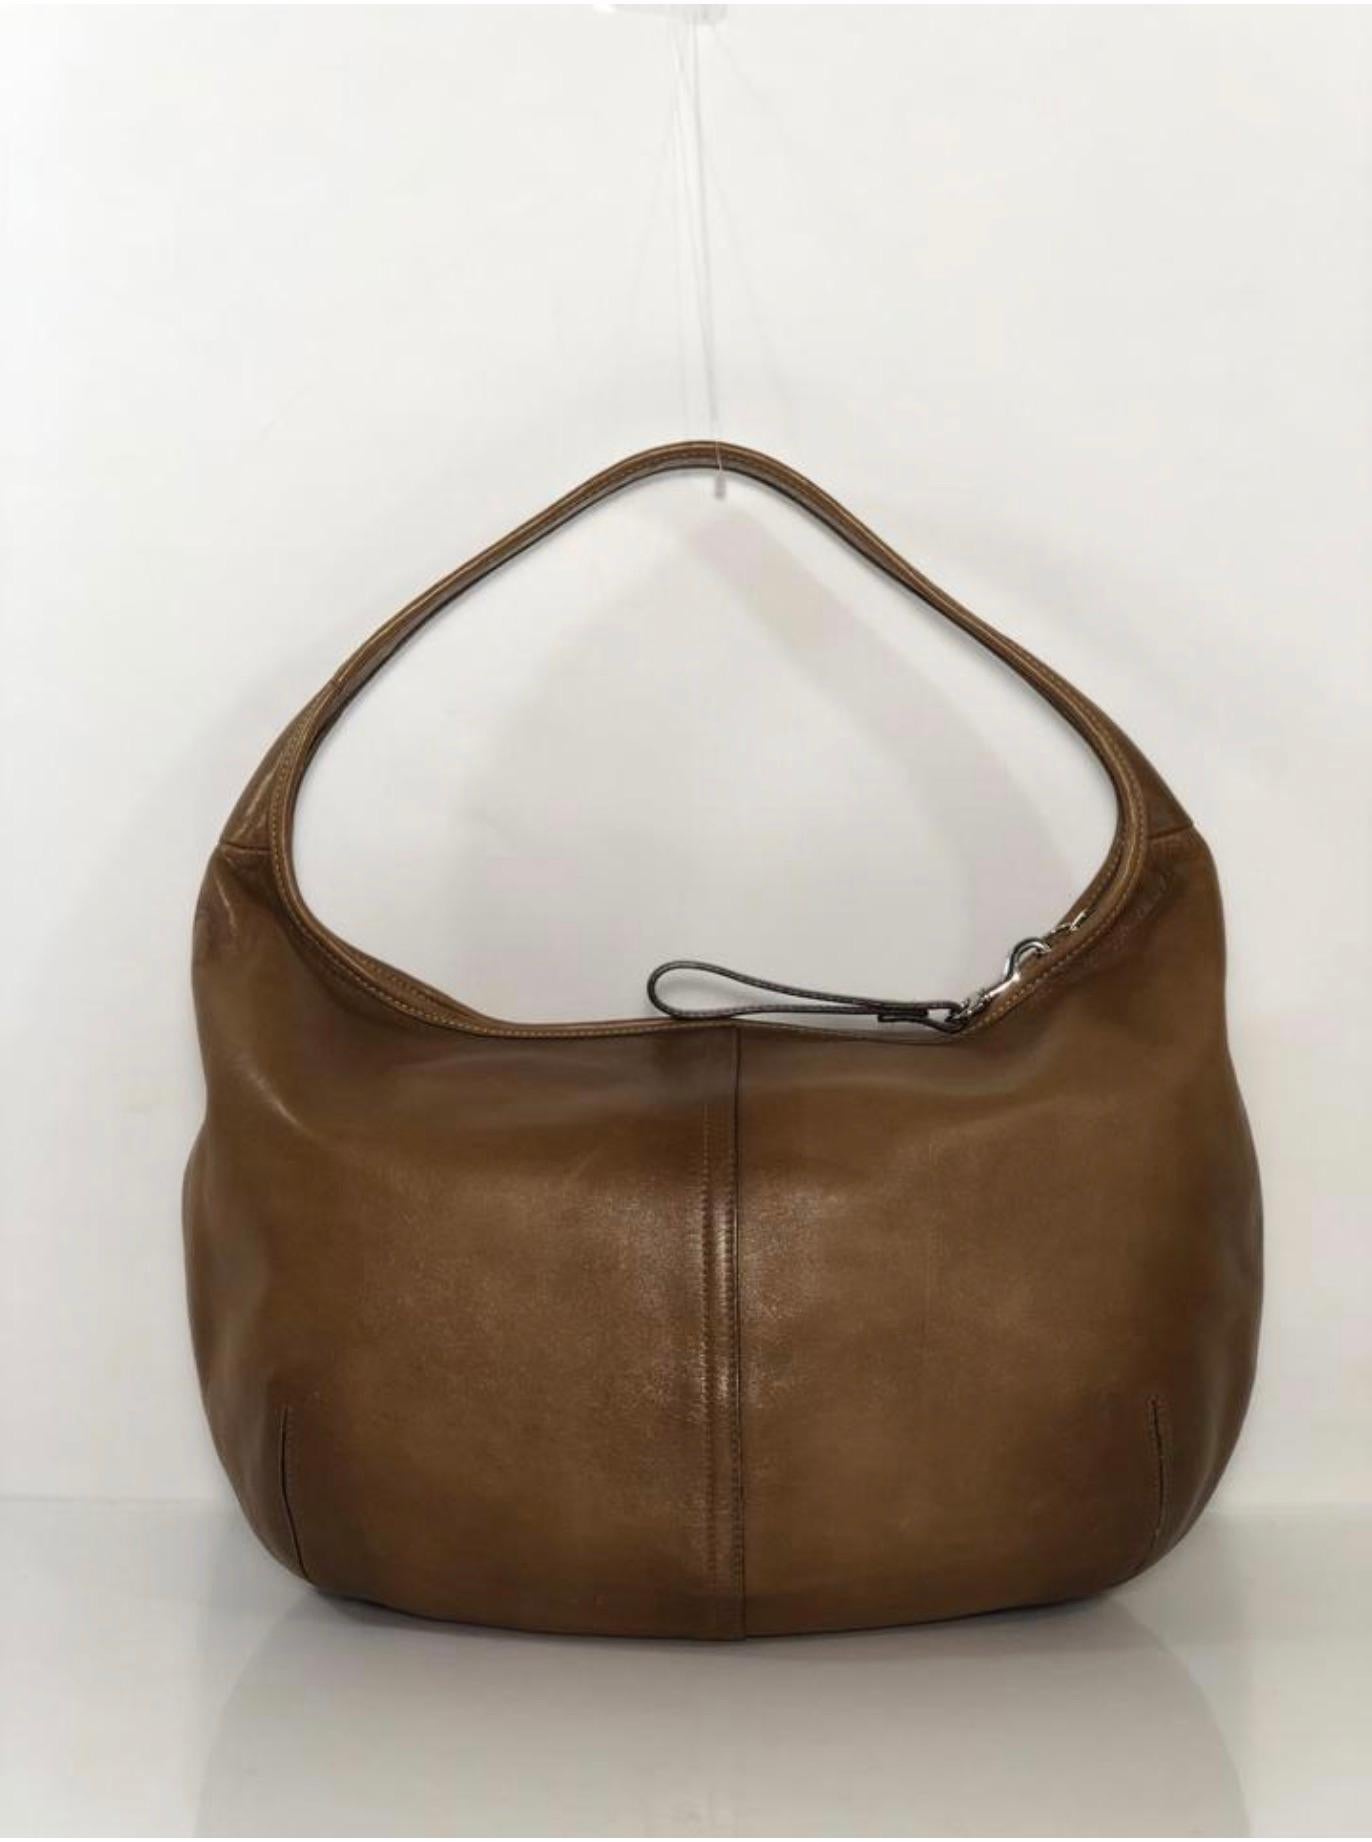 MODEL - Coach Vintage Ergo Leather Hobo in Brown

CONDITION - Exceptional! No signs of wear.

SKU - AIS-KUTA-6

ORIGINAL/CURRENT RETAIL PRICE - 395 + tax

DATE/SERIAL CODE - D3K-9227

DIMENSIONS - L12 x H10 x D3

STRAP/HANDLE DROP - 7

MATERIAL -